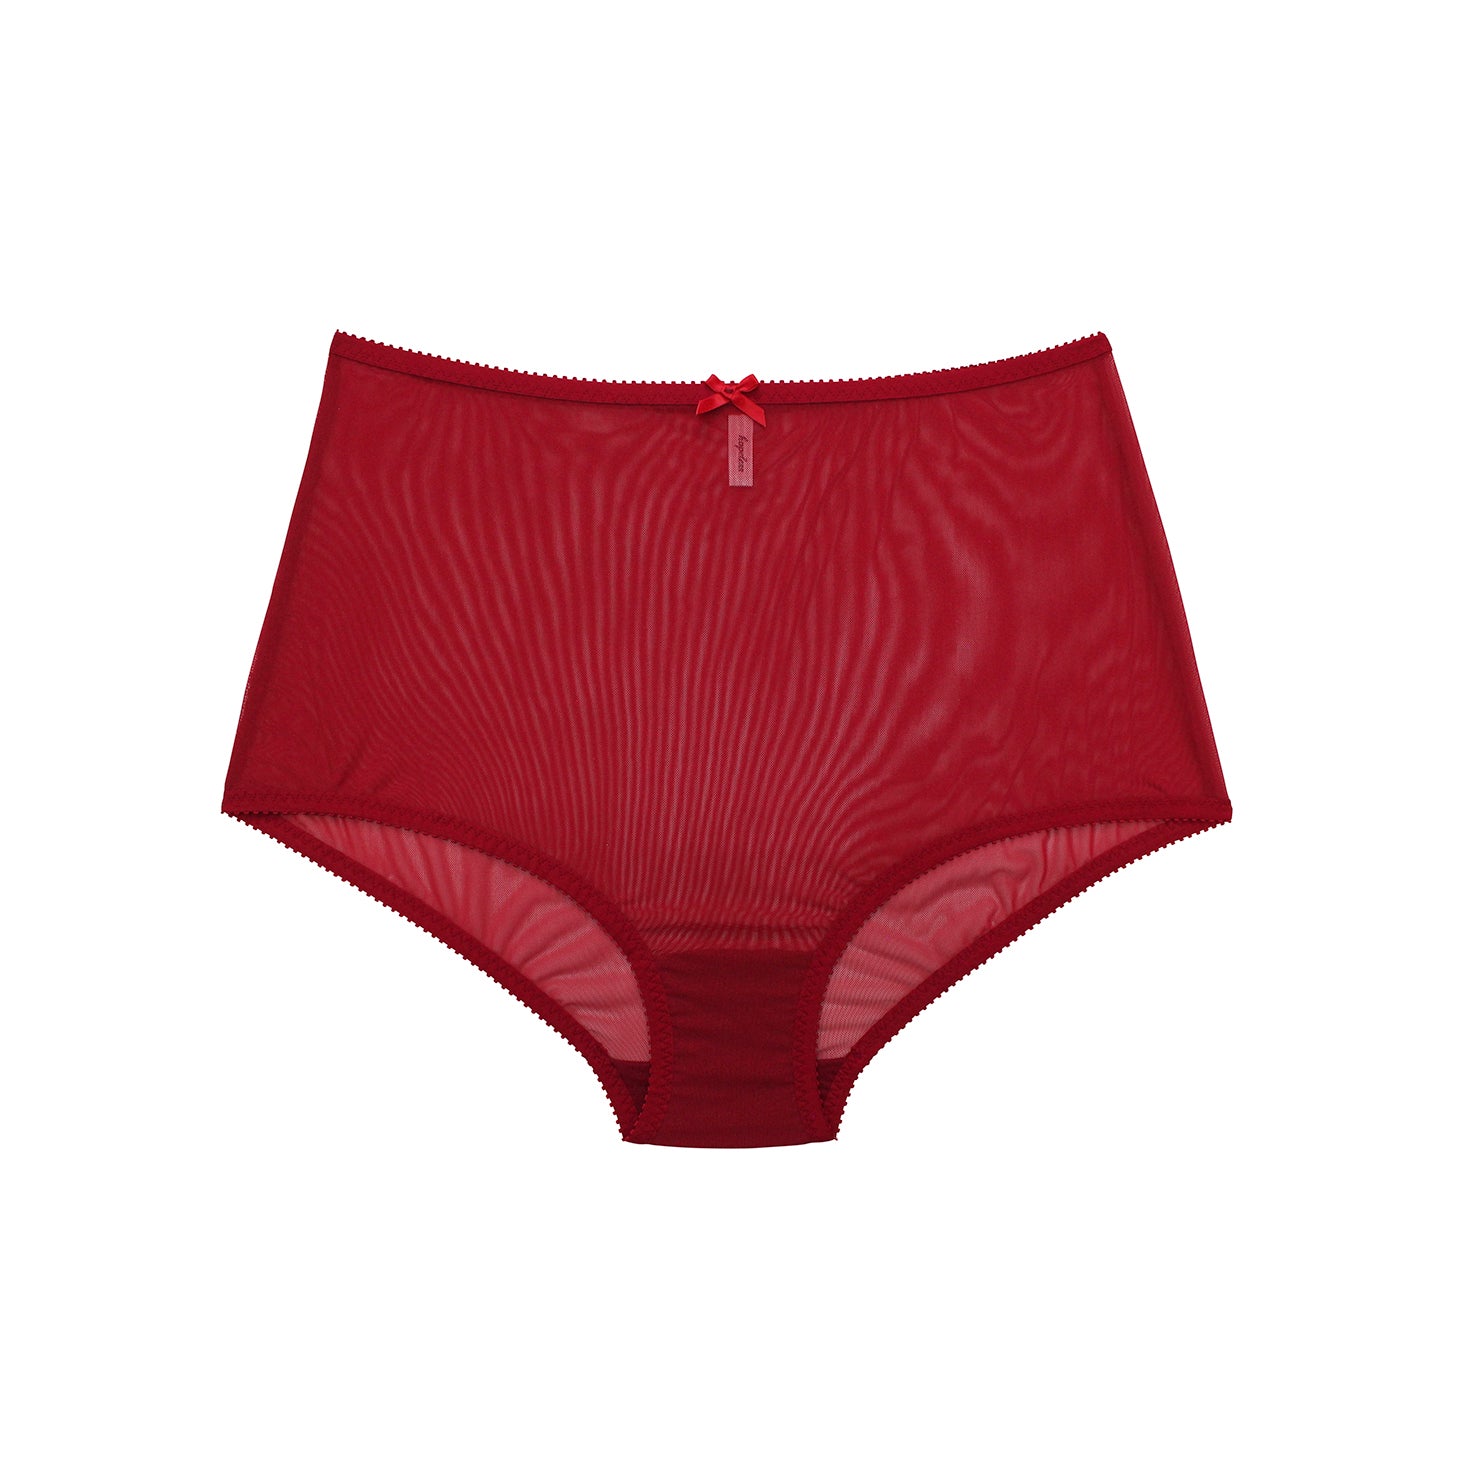 Red Underwear  High Waisted Lingerie Made in Australia by